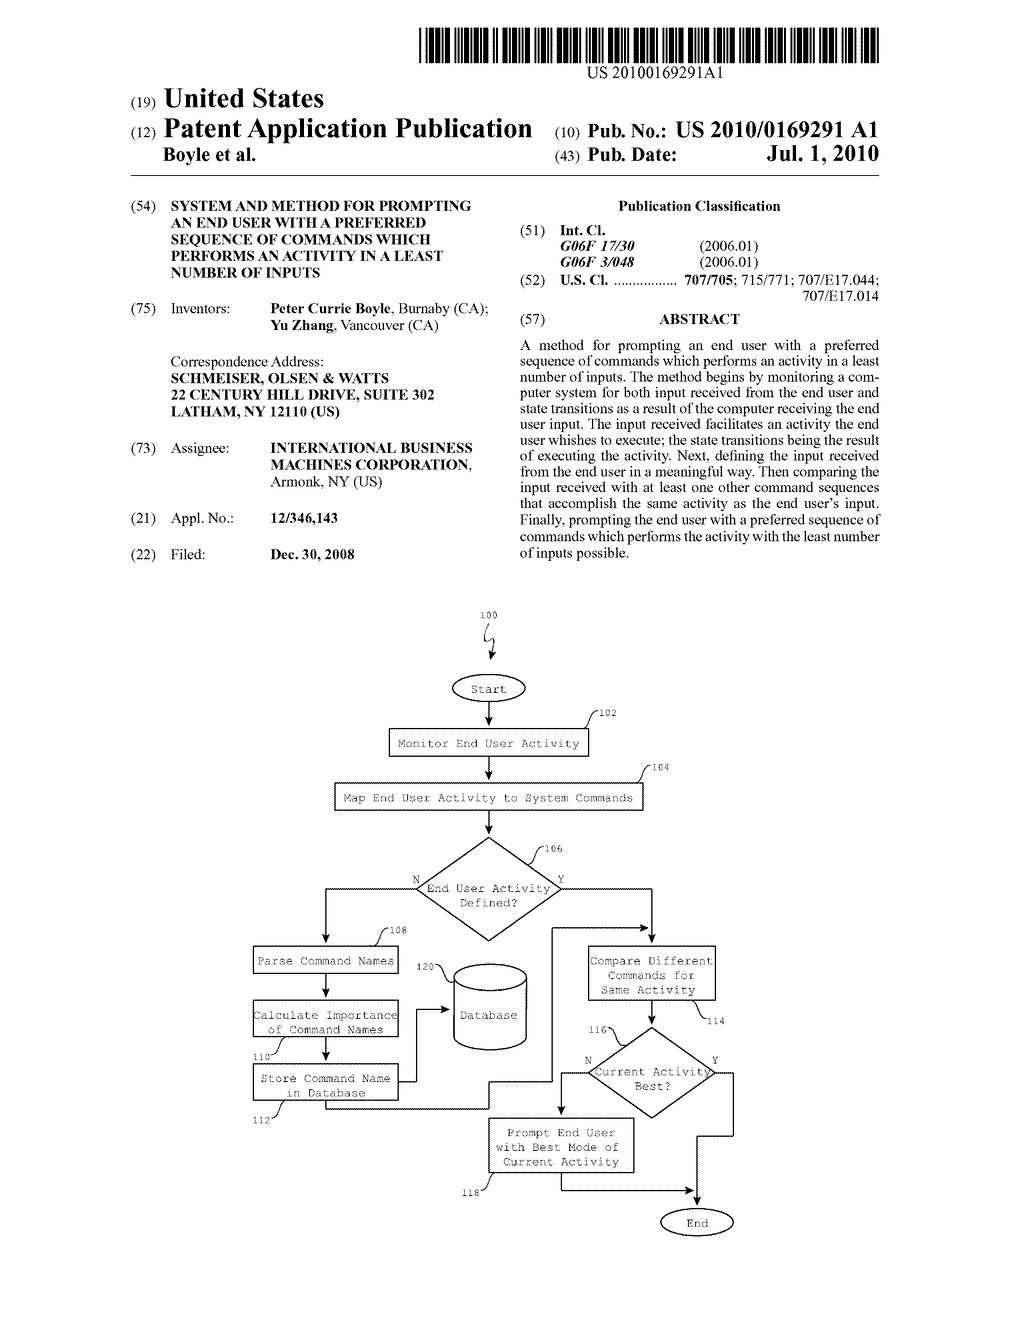 SYSTEM AND METHOD FOR PROMPTING AN END USER WITH A PREFERRED SEQUENCE OF COMMANDS WHICH PERFORMS AN ACTIVITY IN A LEAST NUMBER OF INPUTS - diagram, schematic, and image 01